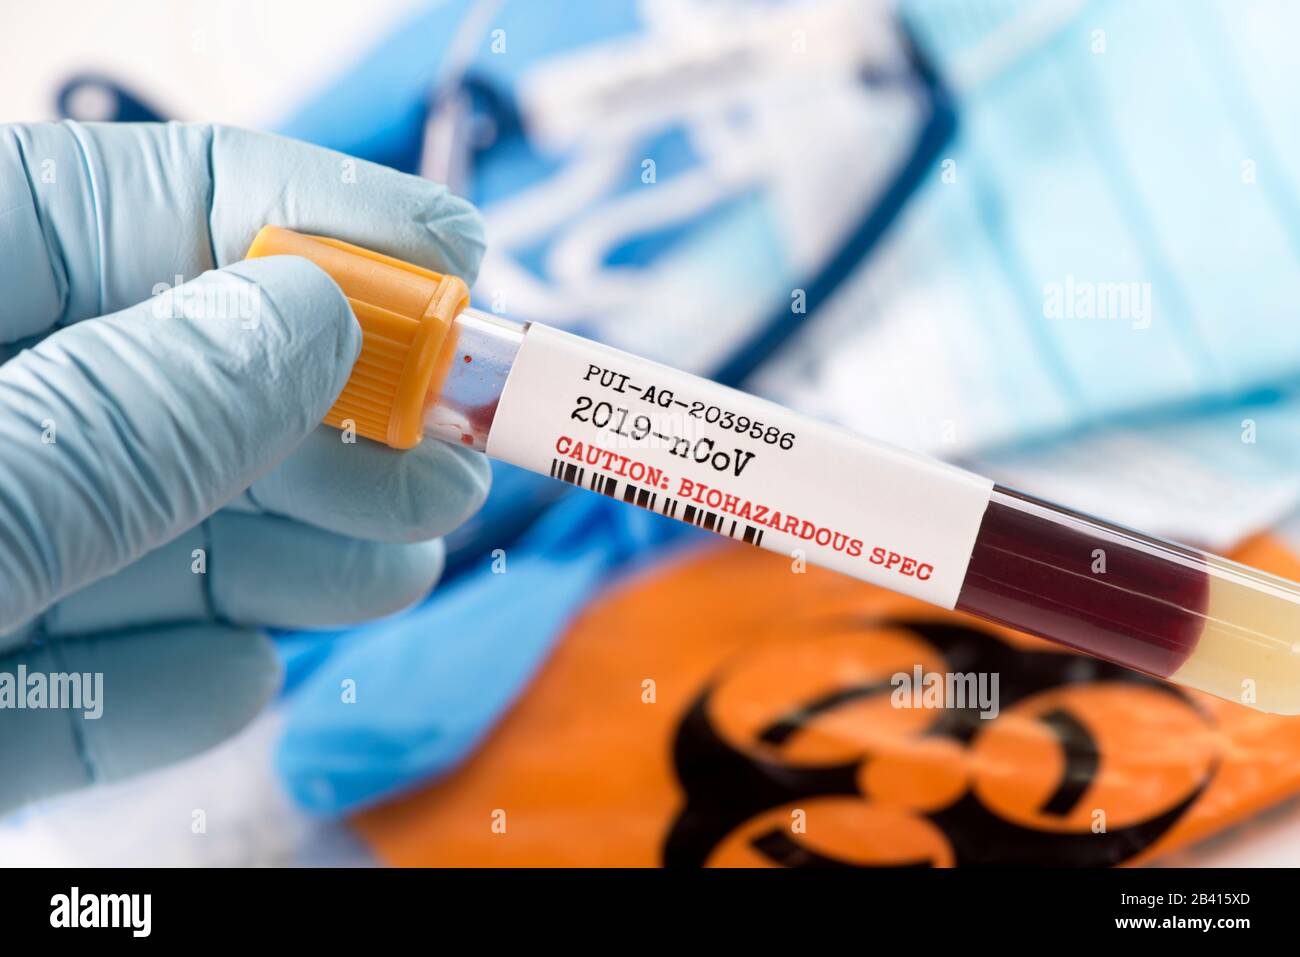 Corona virus 2019-nCoV blood test in gold top serum separator blood tube with gloves, mask and biohazard bag. Stock Photo